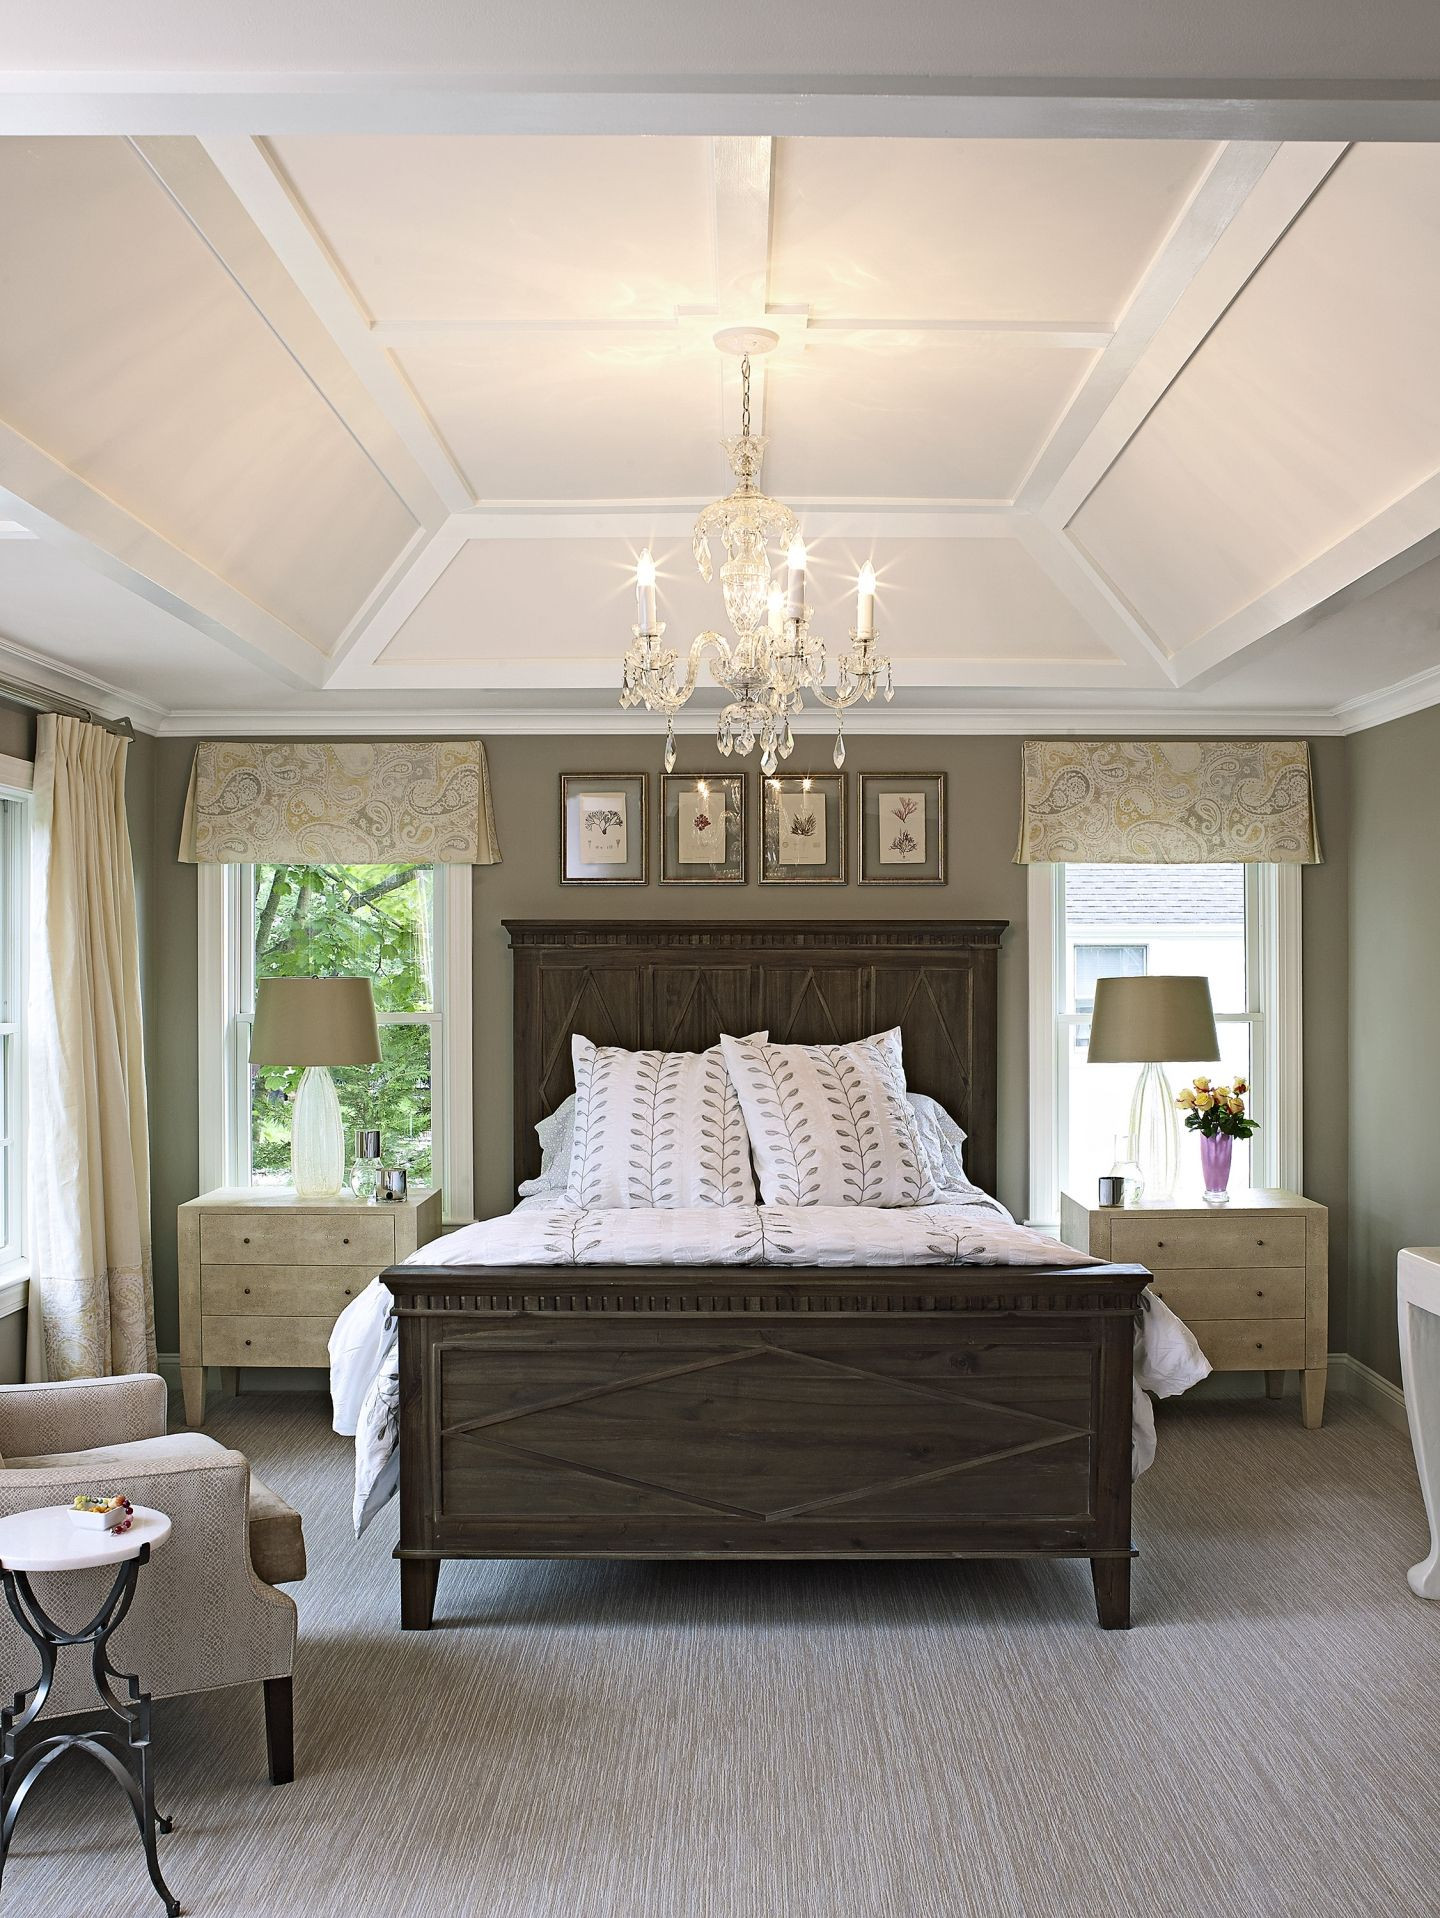 Master Bedroom Ceiling Ideas
 Bold Colors and Design Choices Transform a 1950s Colonial